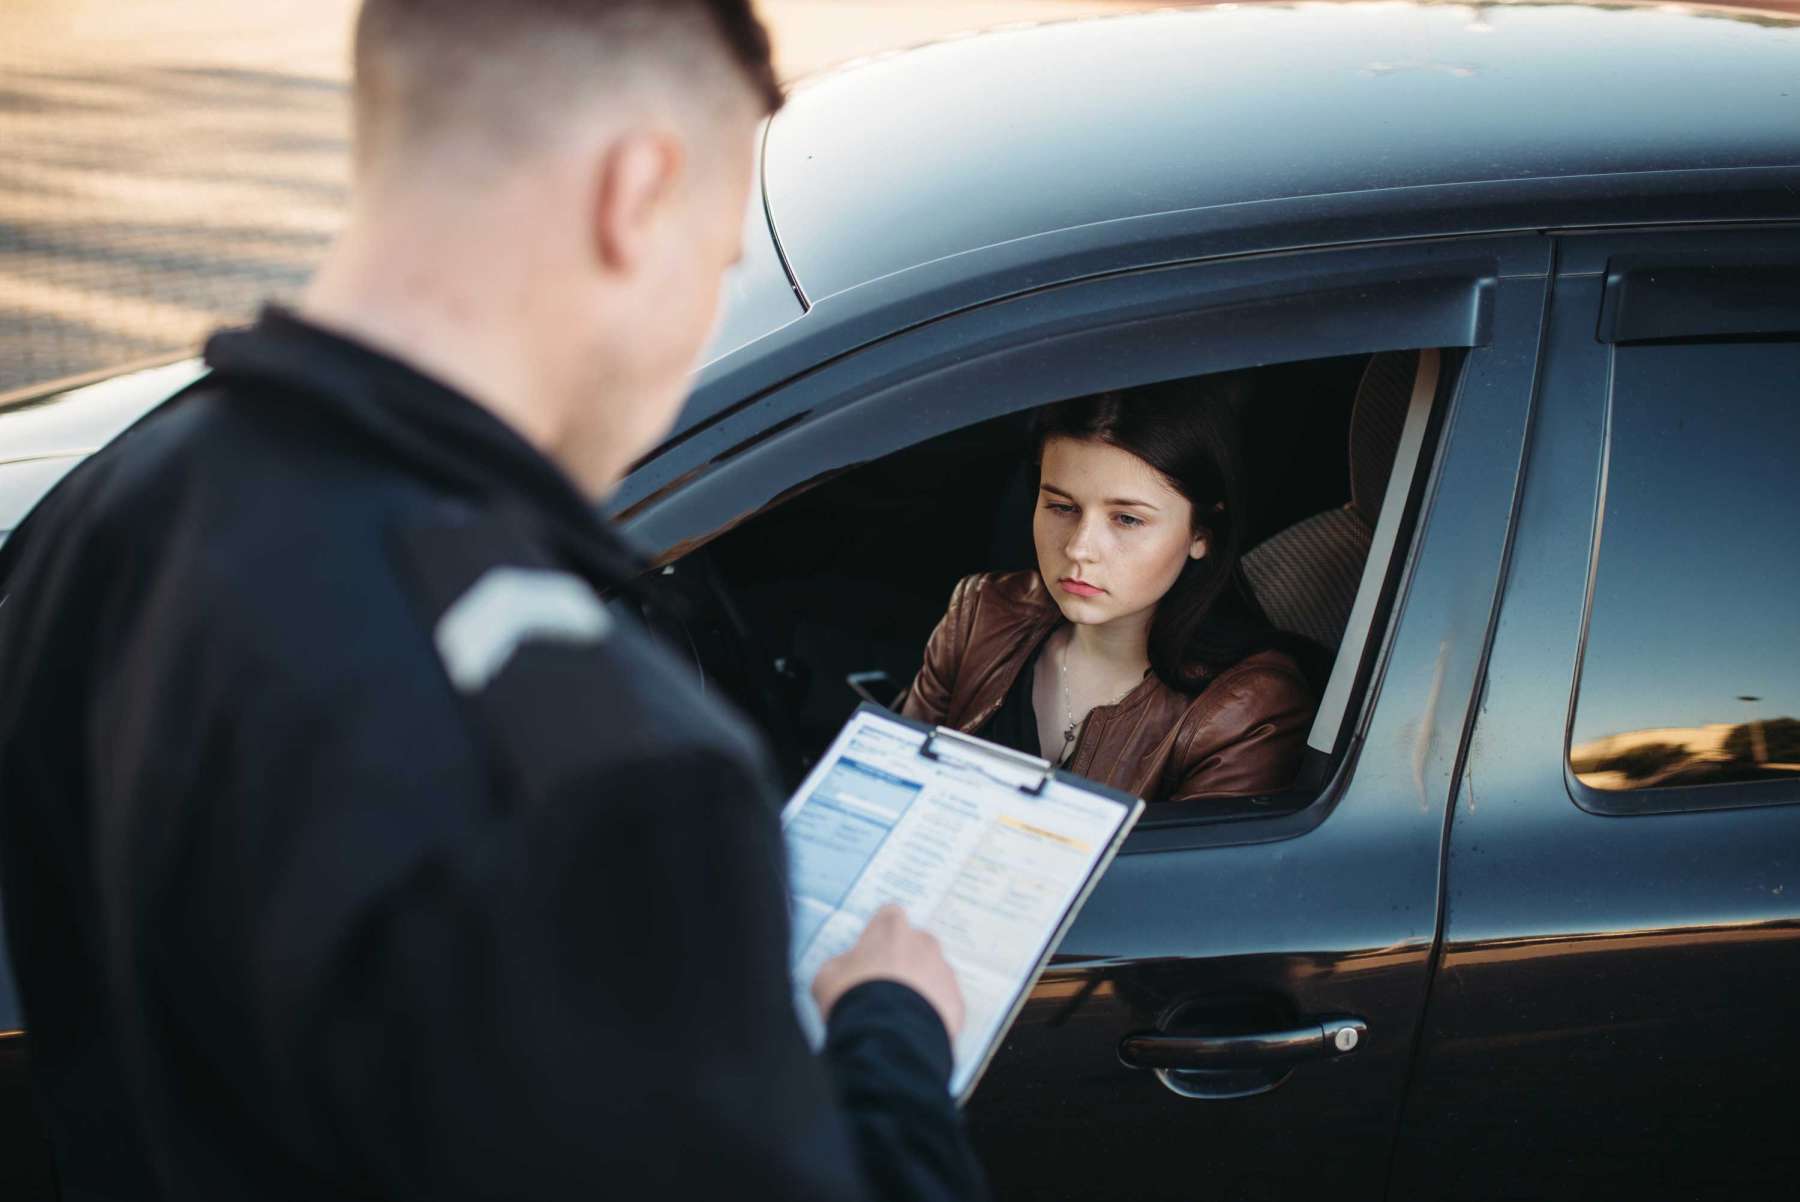 Fight Back: Beating a traffic ticket starts as soon as you are pulled over